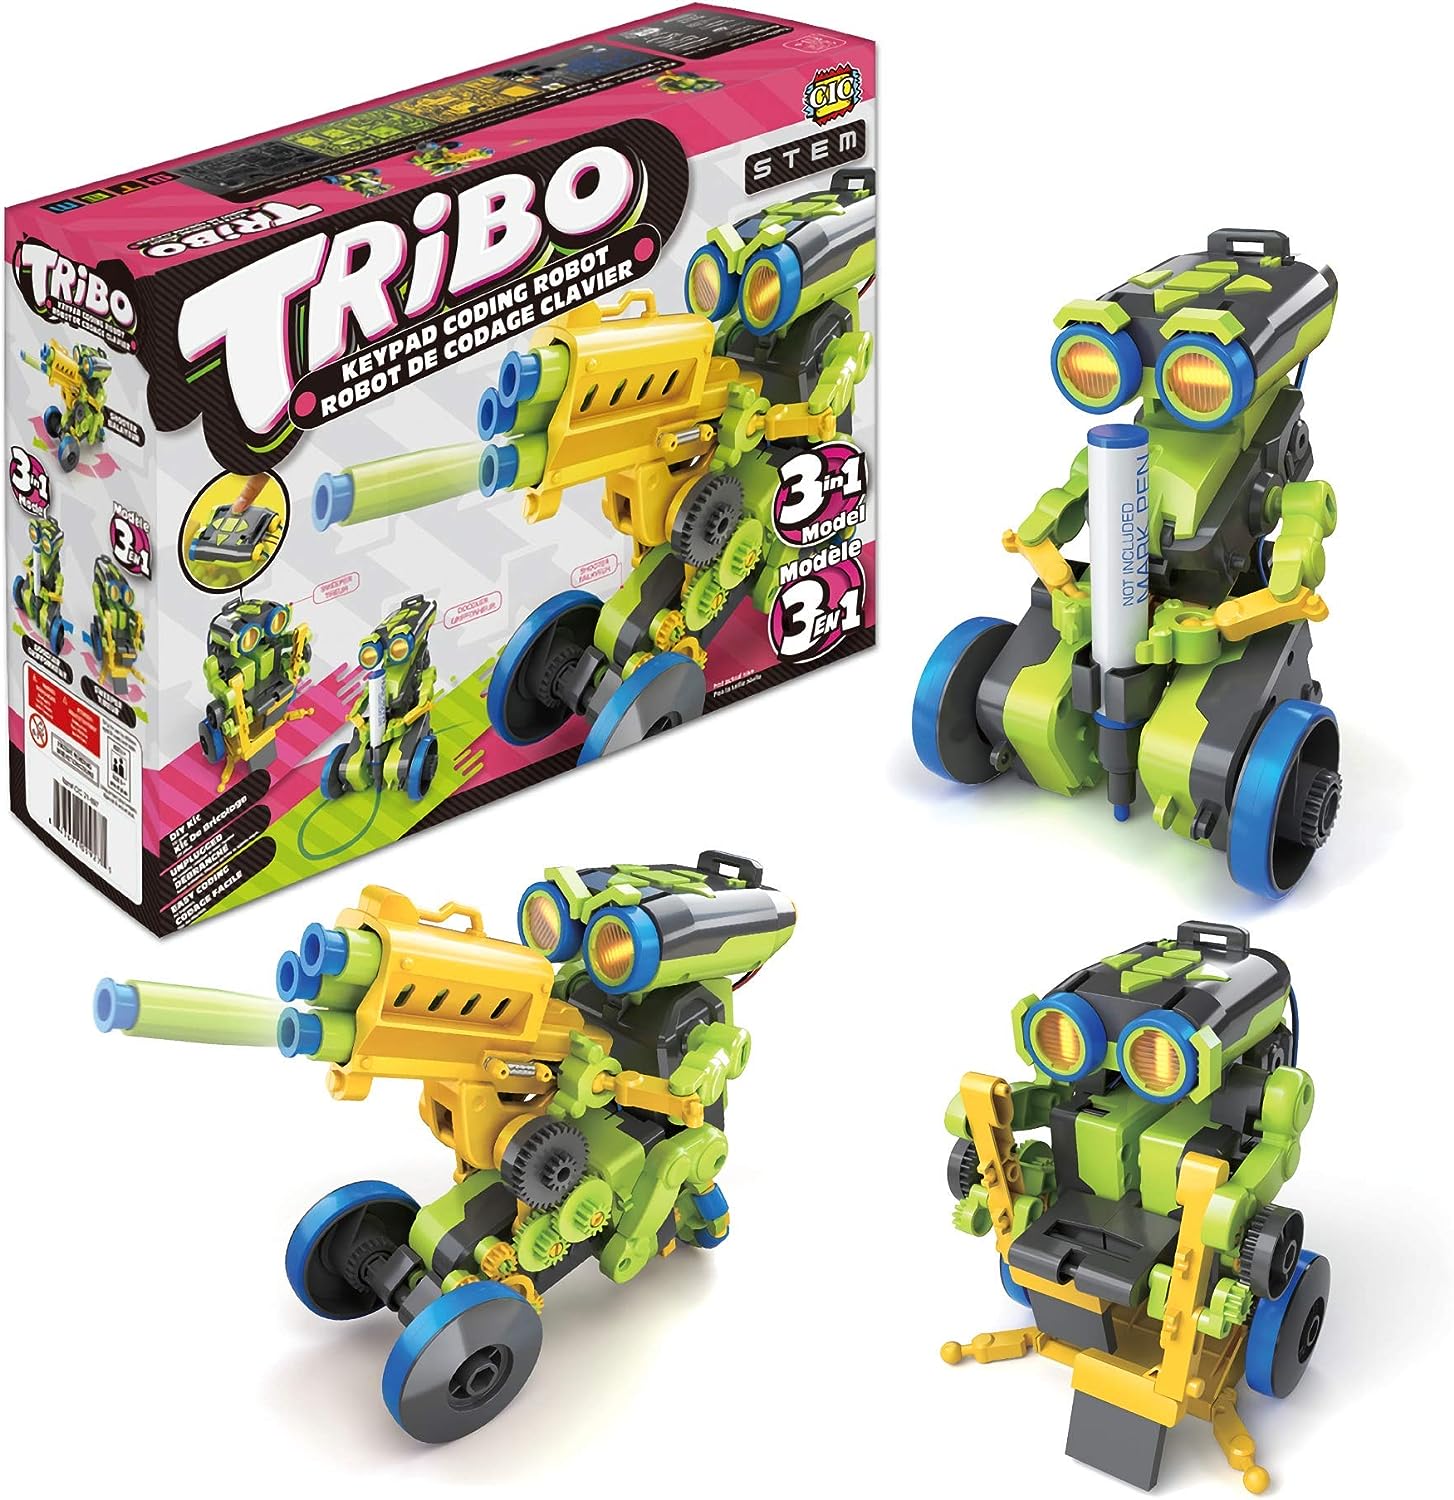 tribo 3 in 1 keypad coding robot review